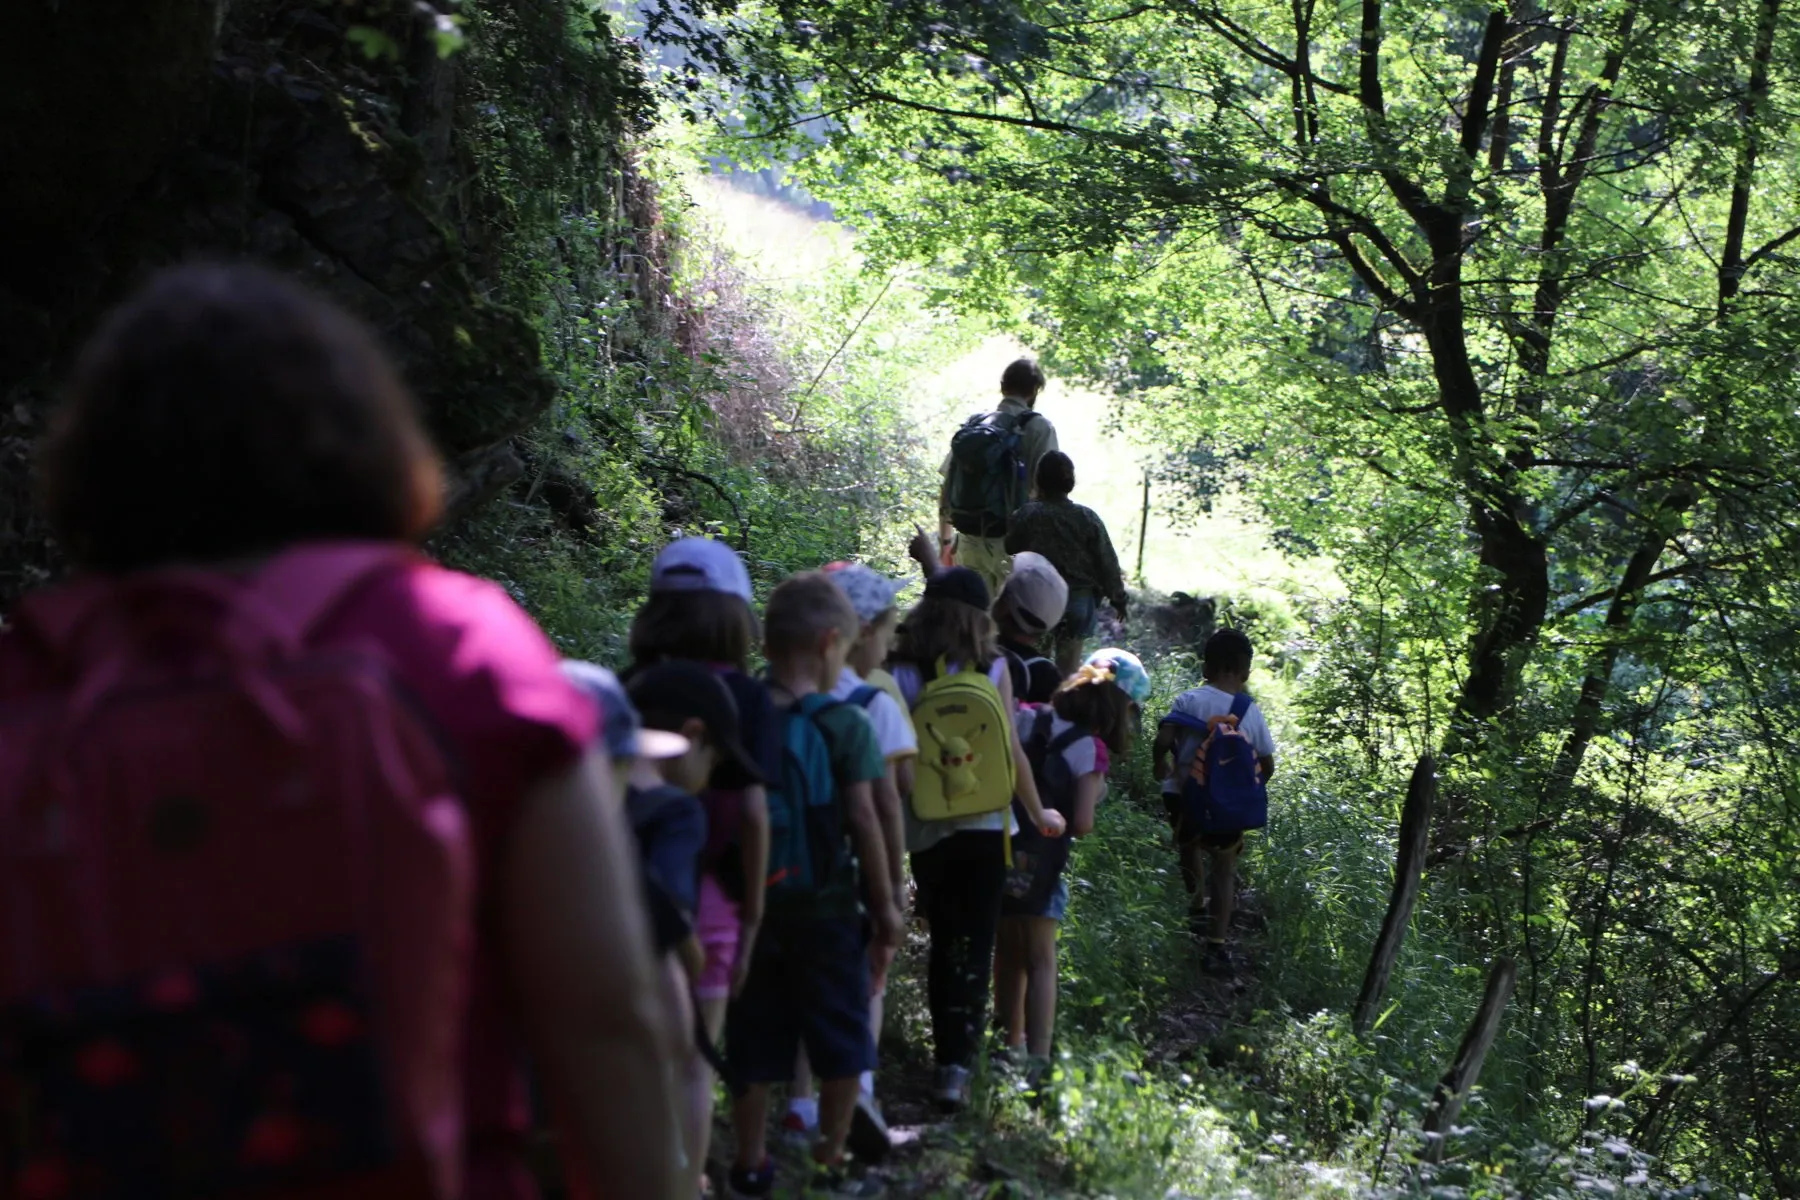 A group of children following an adult through the forest